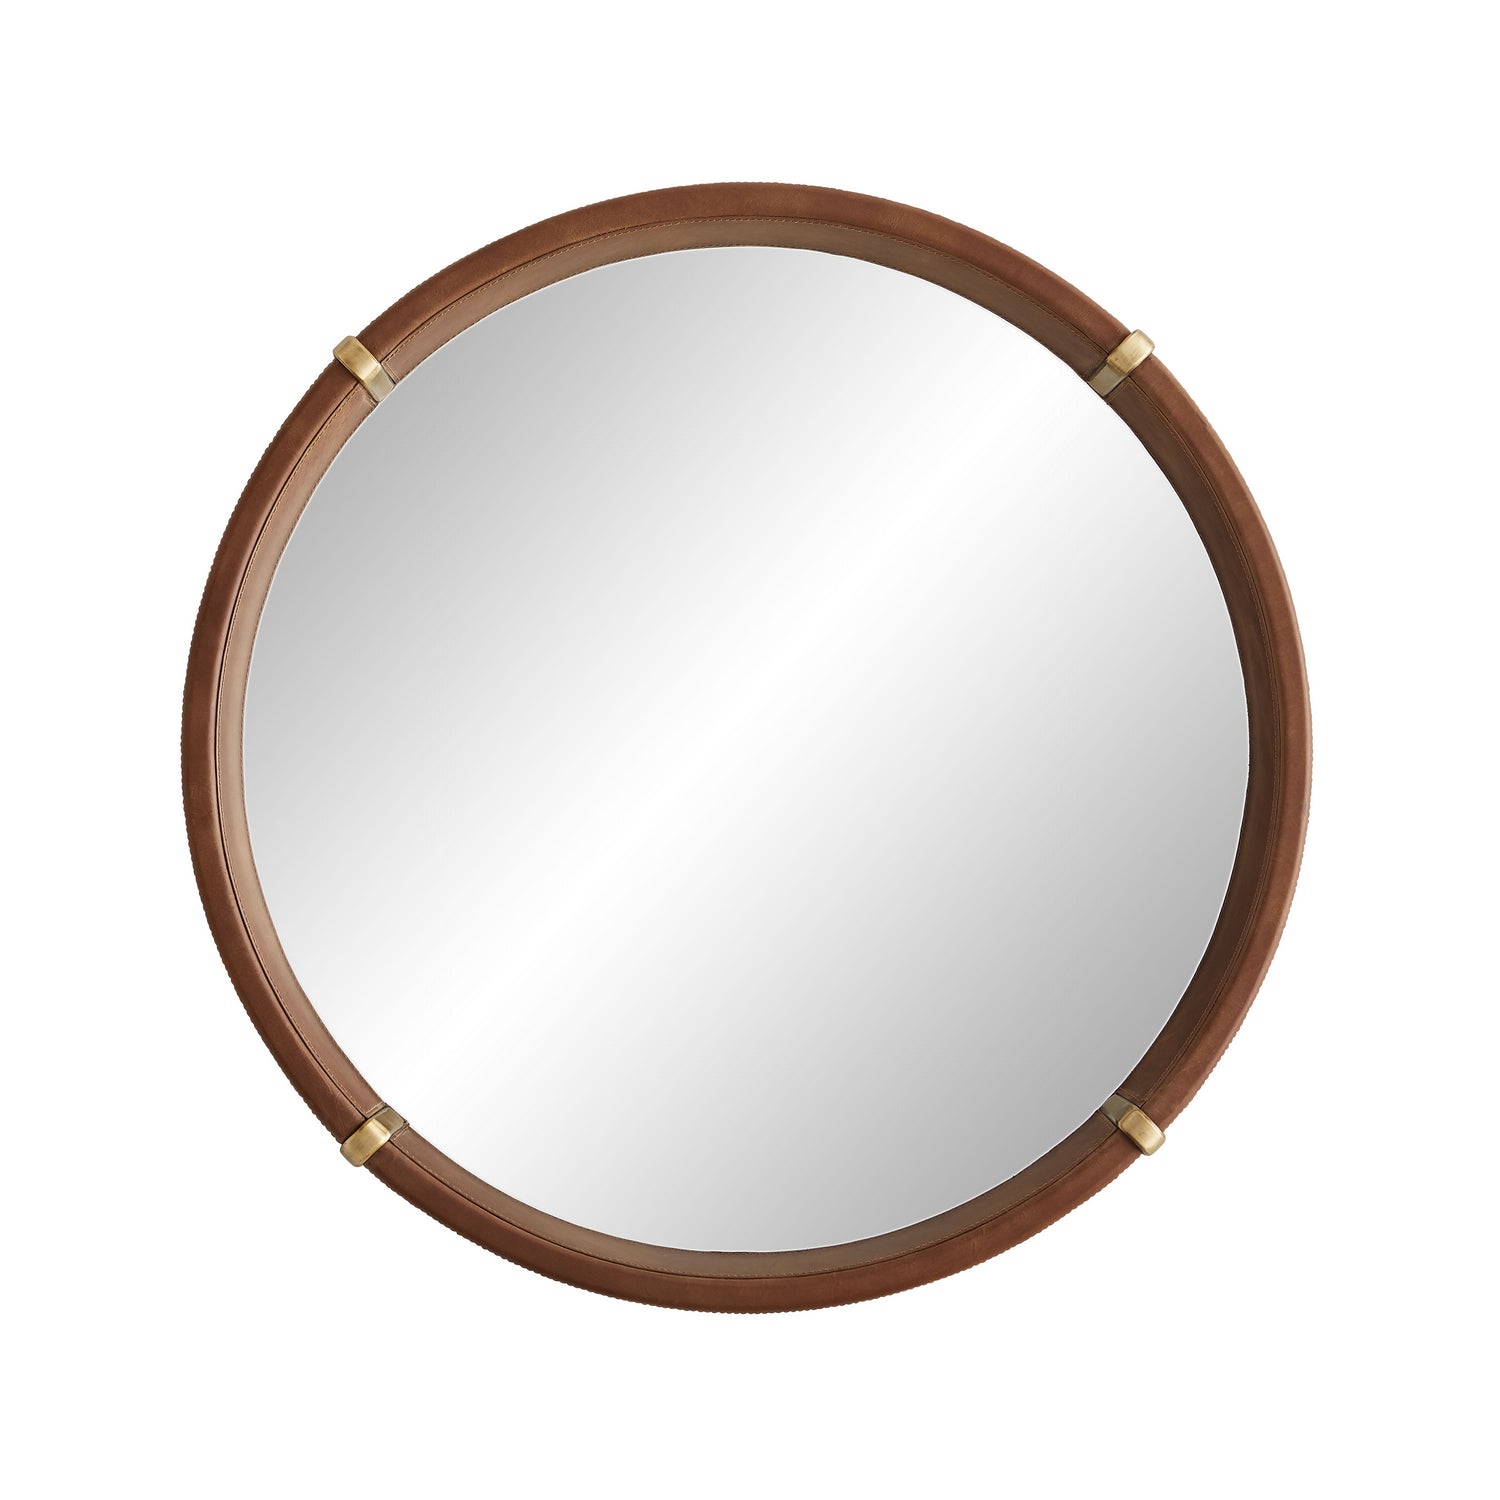 Mirror from the Edmund collection in Brown finish